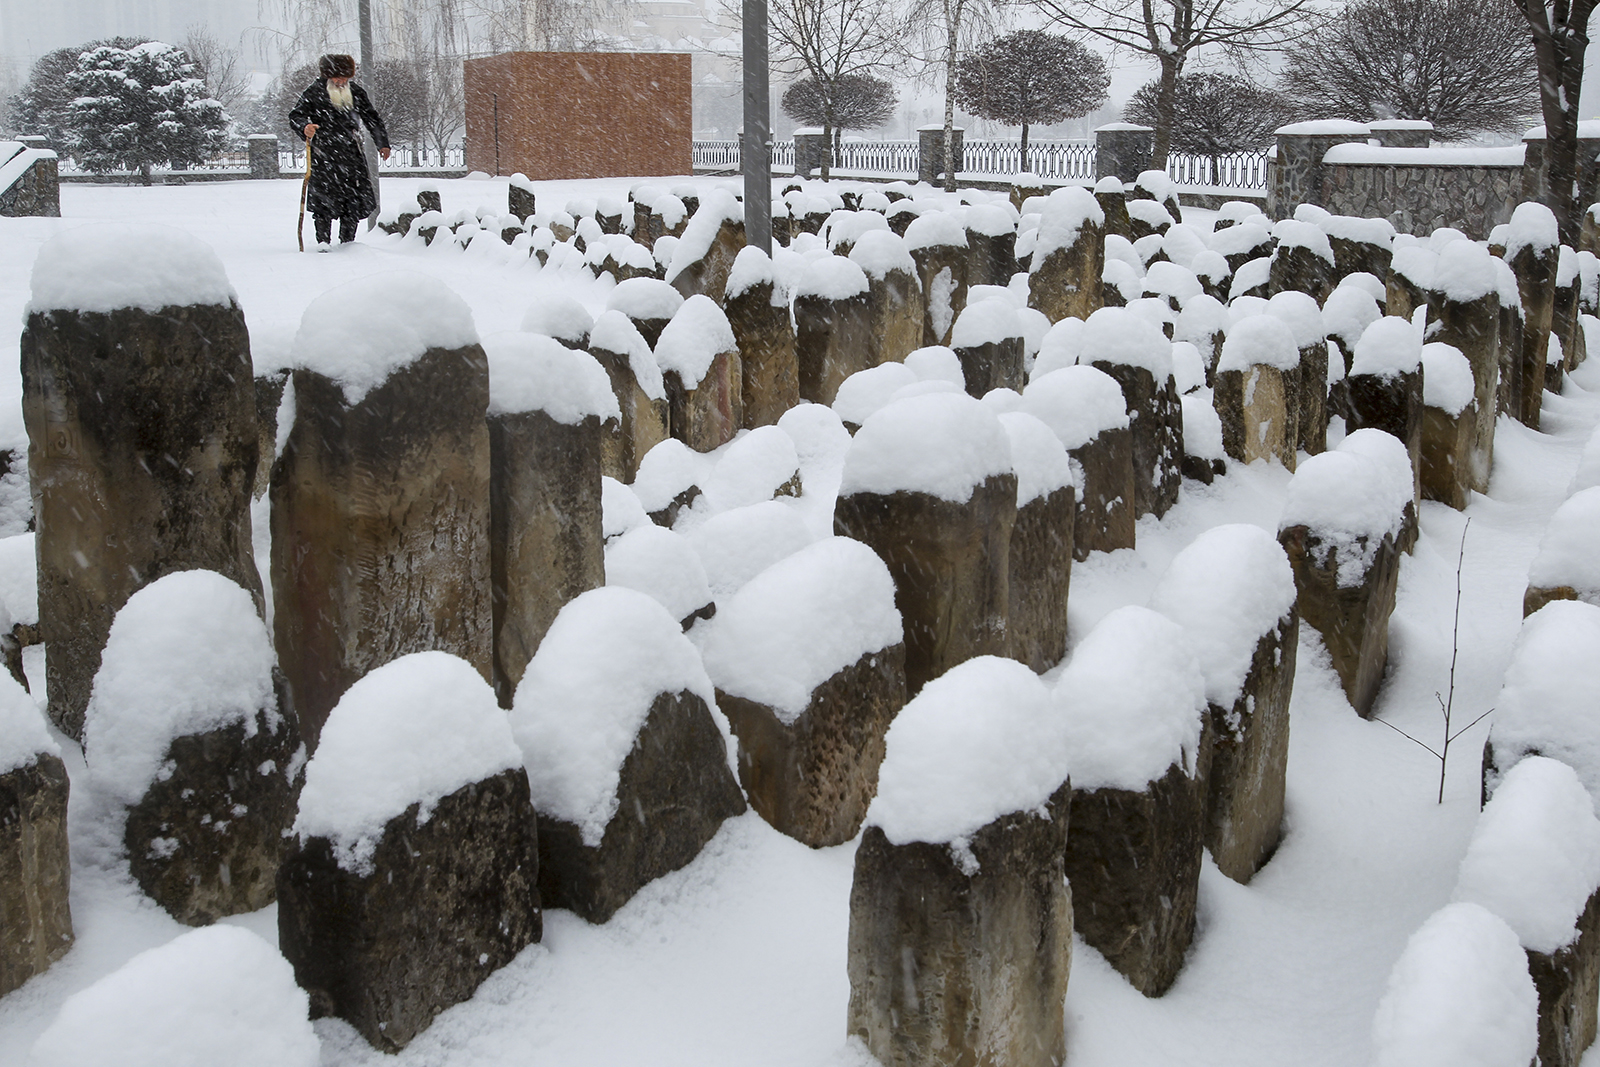 An elderly Chechen man walks to pray at a snow-covered cemetery, a memorial to the Stalin-era deportation's victims, in Grozny, Russia, Friday, March 12, 2021. Chechens and Ingush were victims of the 1944 deportations to the barren steppes of then-Soviet Central Asia. (AP Photo/Musa Sadulayev)